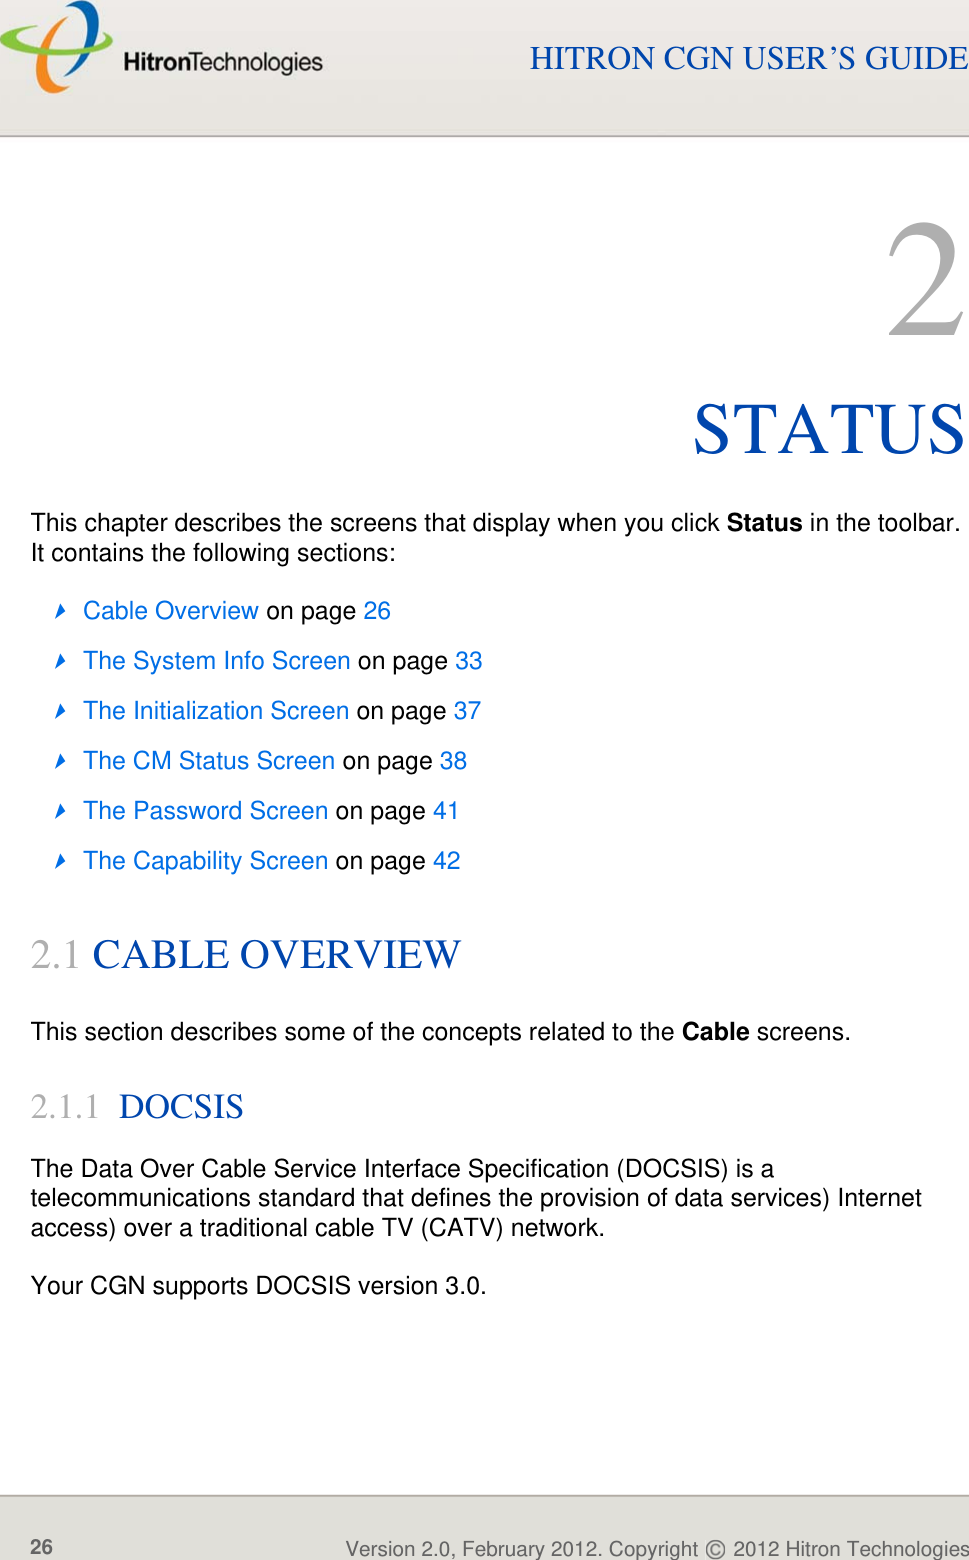 STATUSVersion 2.0, February 2012. Copyright   2012 Hitron Technologies26HITRON CGN USER’S GUIDE2STATUSThis chapter describes the screens that display when you click Status in the toolbar. It contains the following sections:Cable Overview on page 26The System Info Screen on page 33The Initialization Screen on page 37The CM Status Screen on page 38The Password Screen on page 41The Capability Screen on page 422.1 CABLE OVERVIEWThis section describes some of the concepts related to the Cable screens.2.1.1  DOCSISThe Data Over Cable Service Interface Specification (DOCSIS) is a telecommunications standard that defines the provision of data services) Internet access) over a traditional cable TV (CATV) network.Your CGN supports DOCSIS version 3.0.